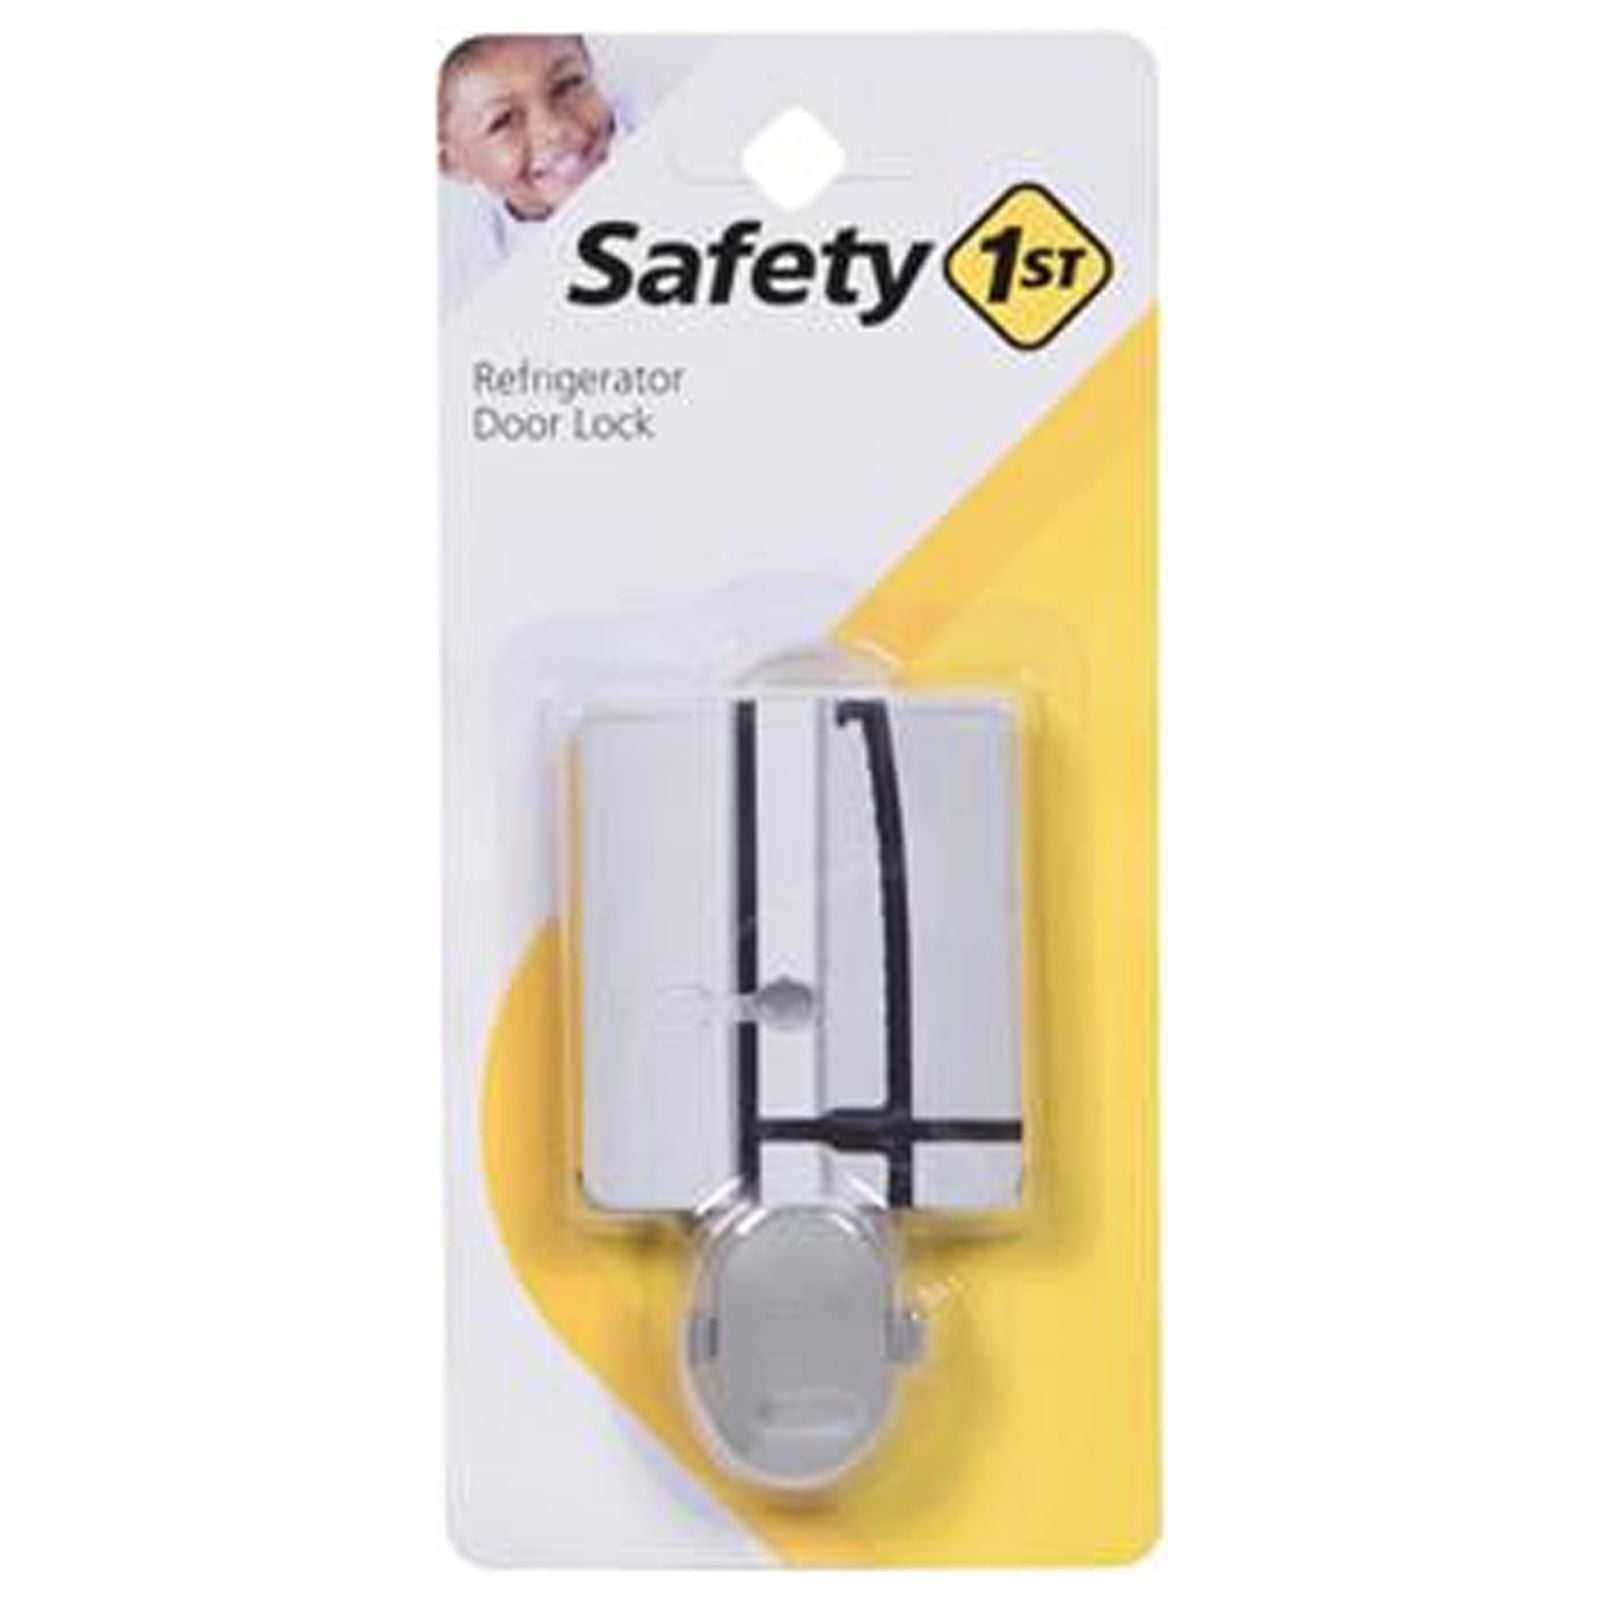 Gpoty Refrigerator Limit Lock Highly Secured Refrigerator Lock with Key File Drawer Lock Safety Cabinet Locks with Double-Sided Tape Mini Refrigerator